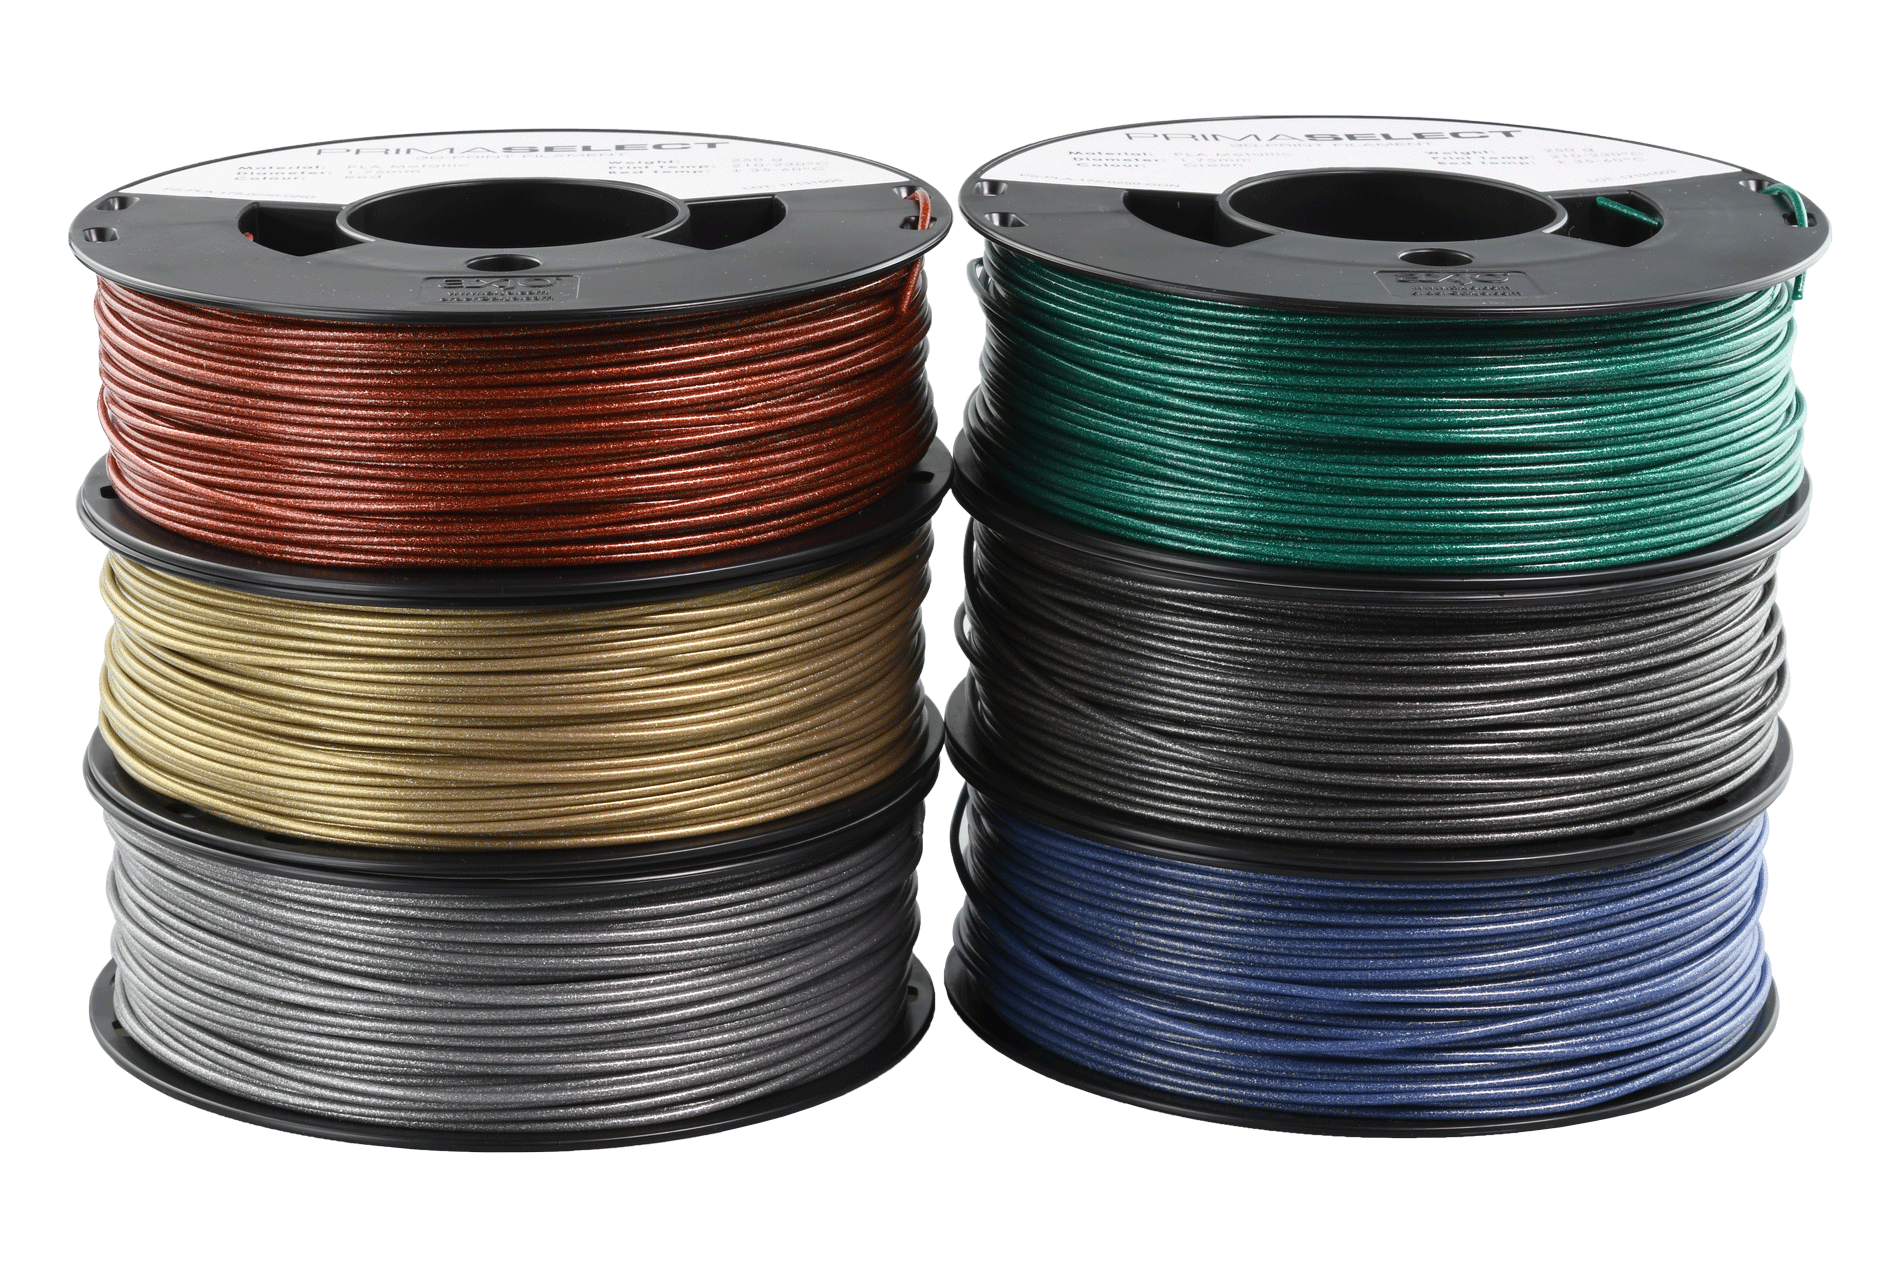 PRIMASELECT PLA - 1.75MM - 6 X 250 G - METALLIC PACK (RED, GREEN, BLUE, SILVER, GOLD, GREY)